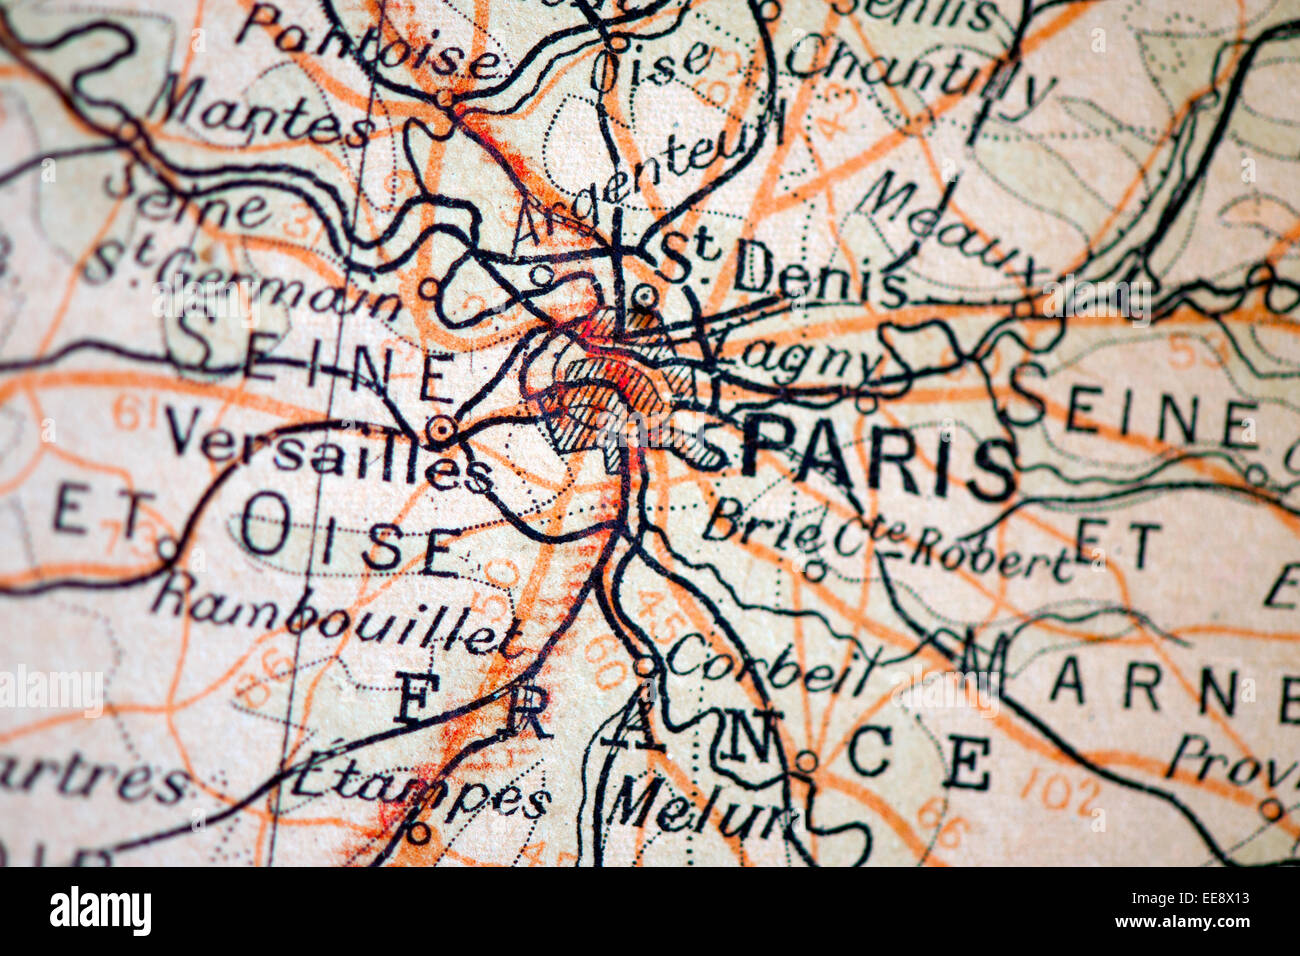 Section taken from Bartholomew's Western Europe Automobile Cloth Map showing Paris Stock Photo